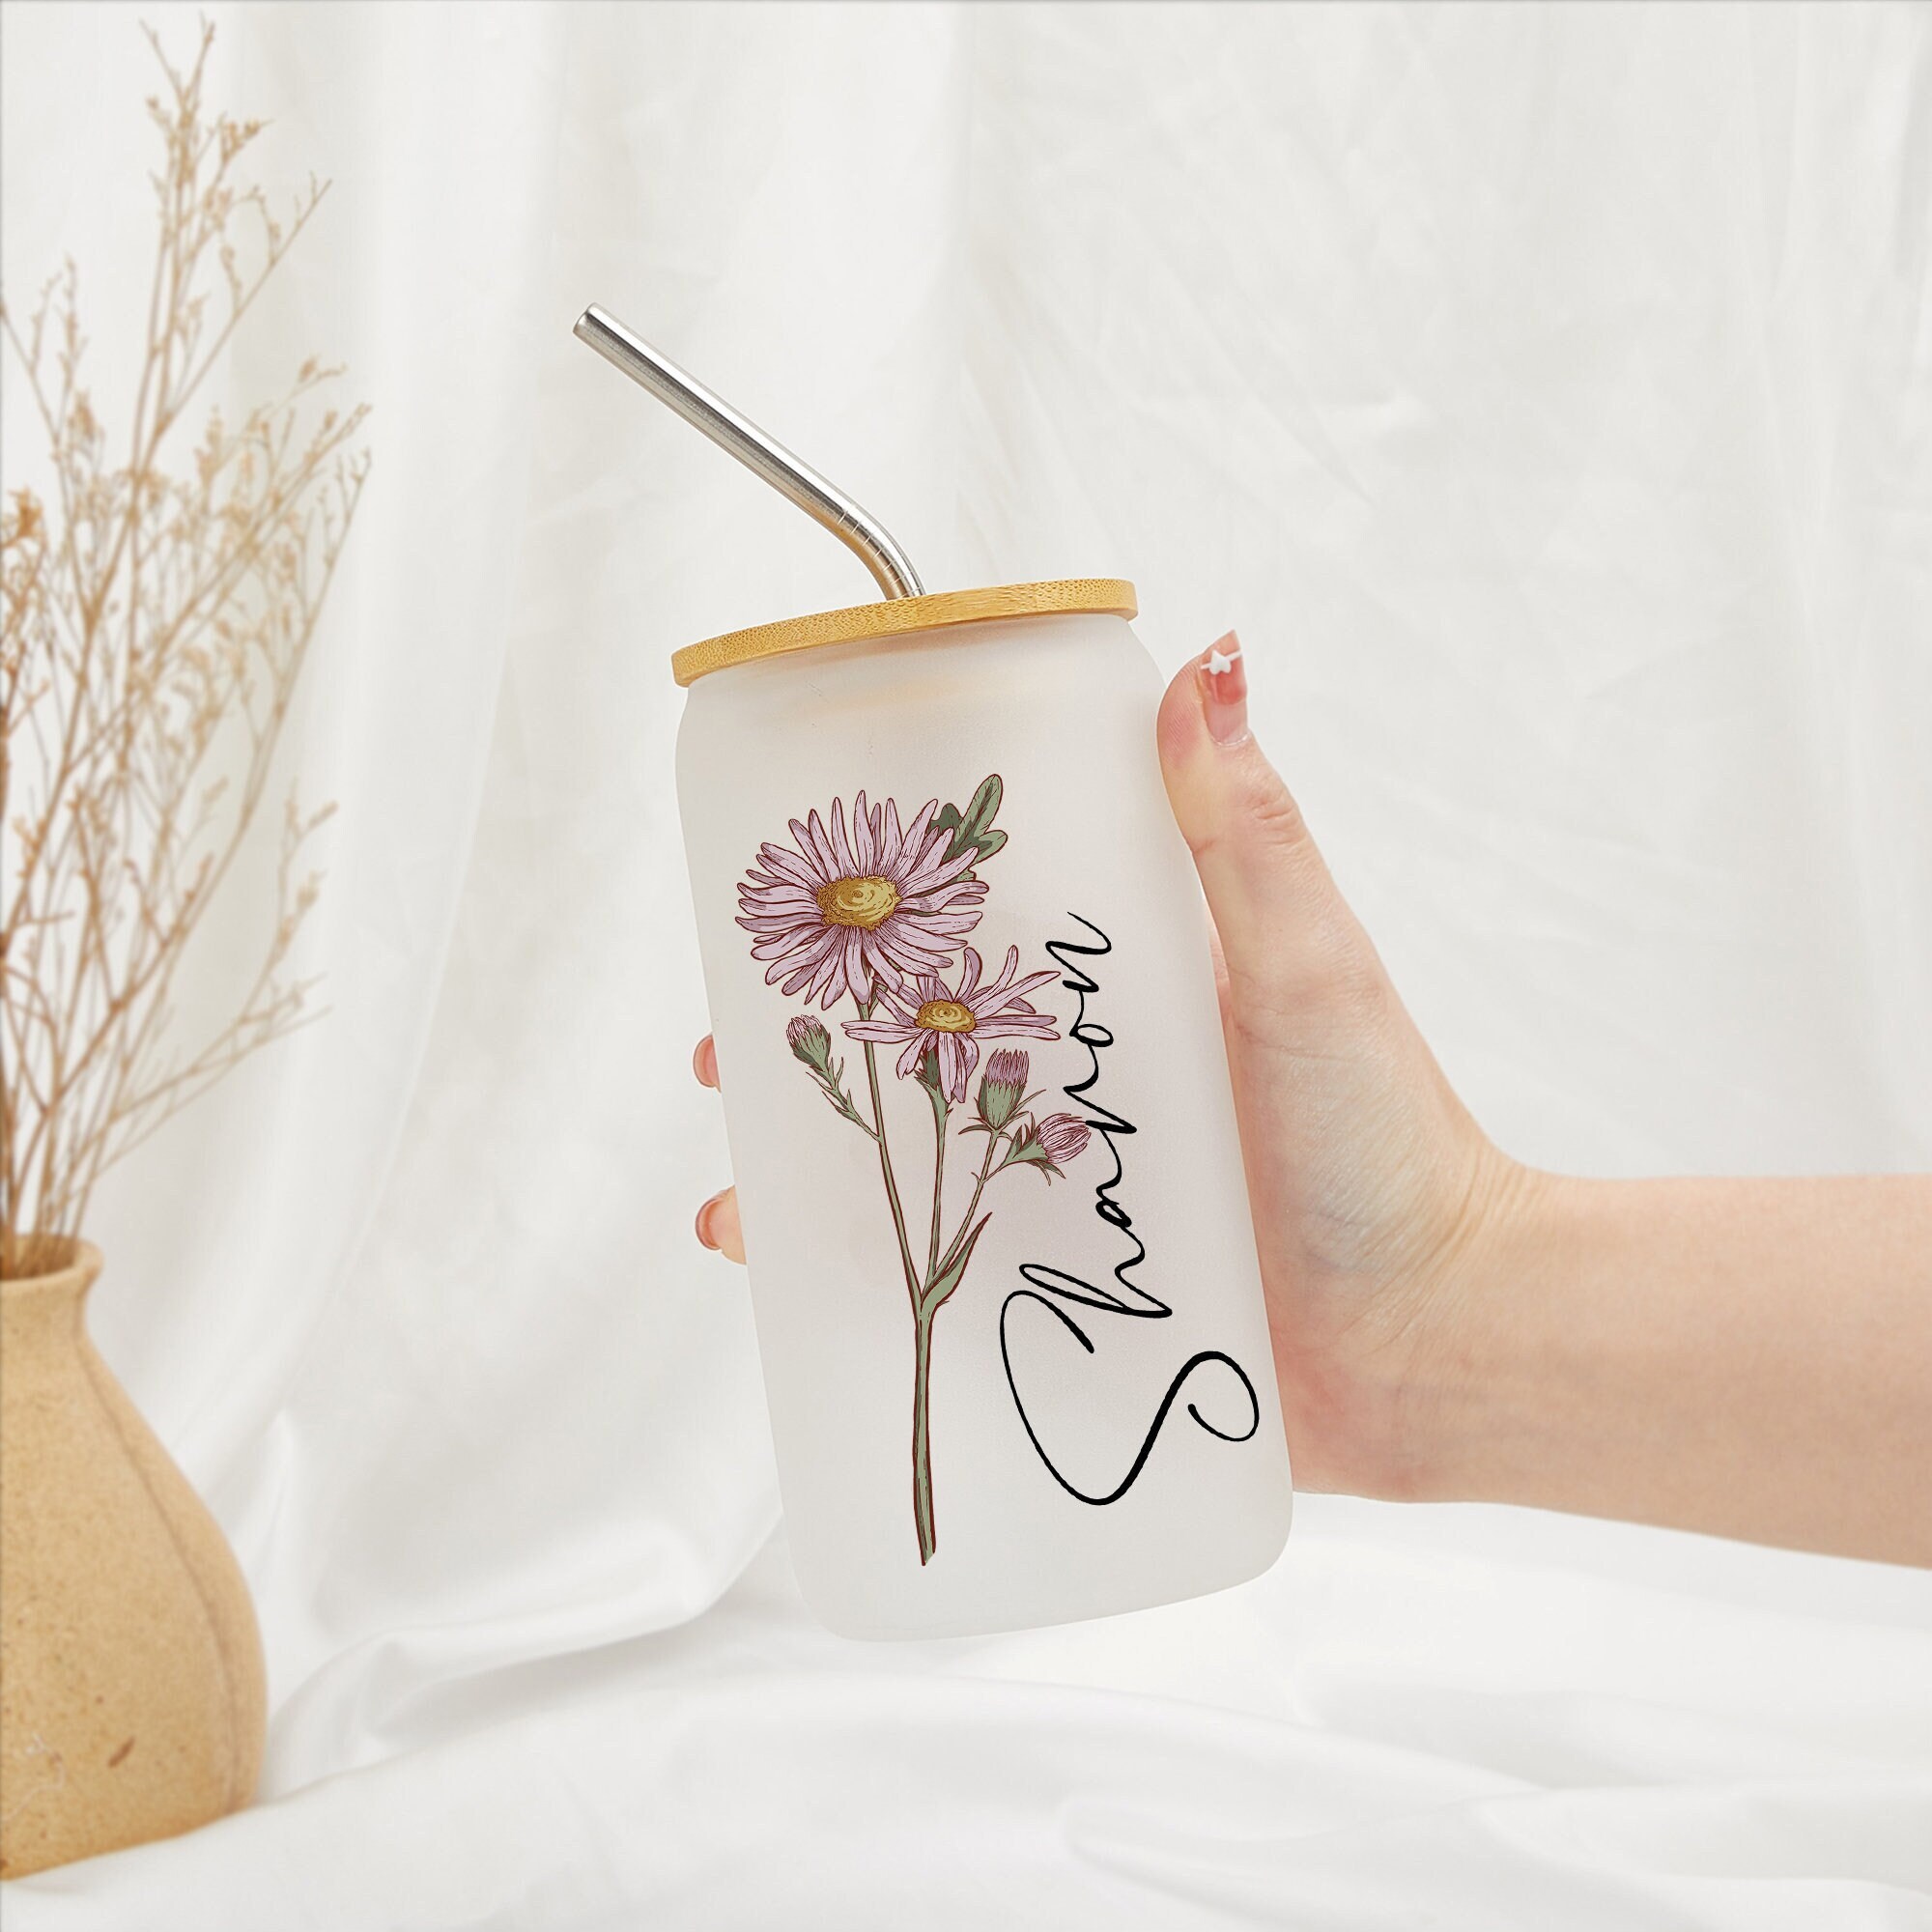 Every Flower Is A Soul Blossoming In Nature - Personalized Custom Glass  Cup, Iced Coffee Cup - Birthday Gift, Gift For Yourself